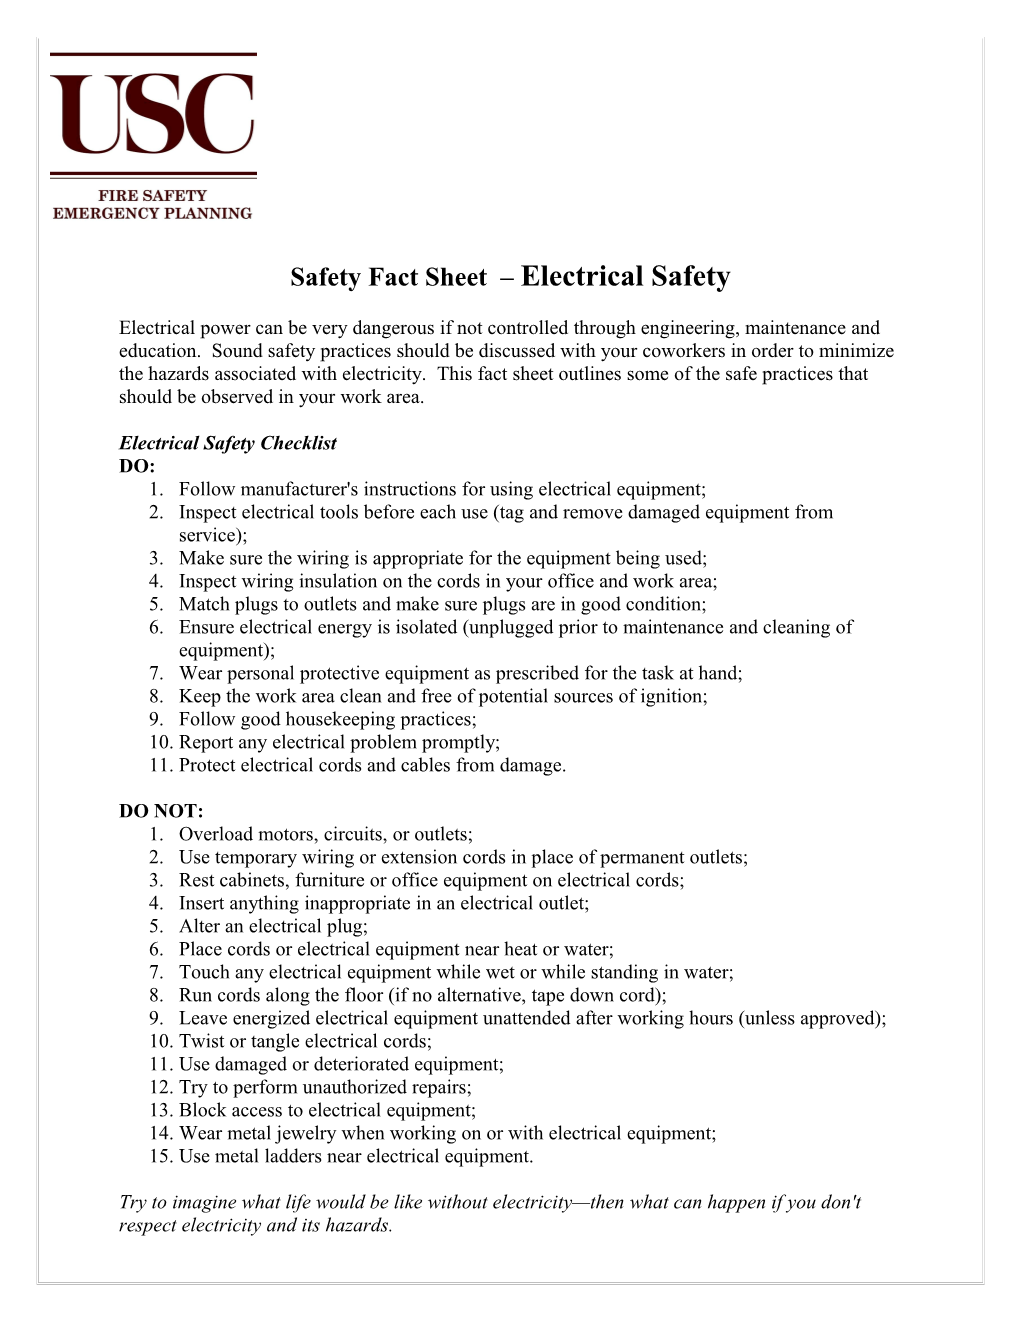 Safety Fact Sheet Electrical Safety